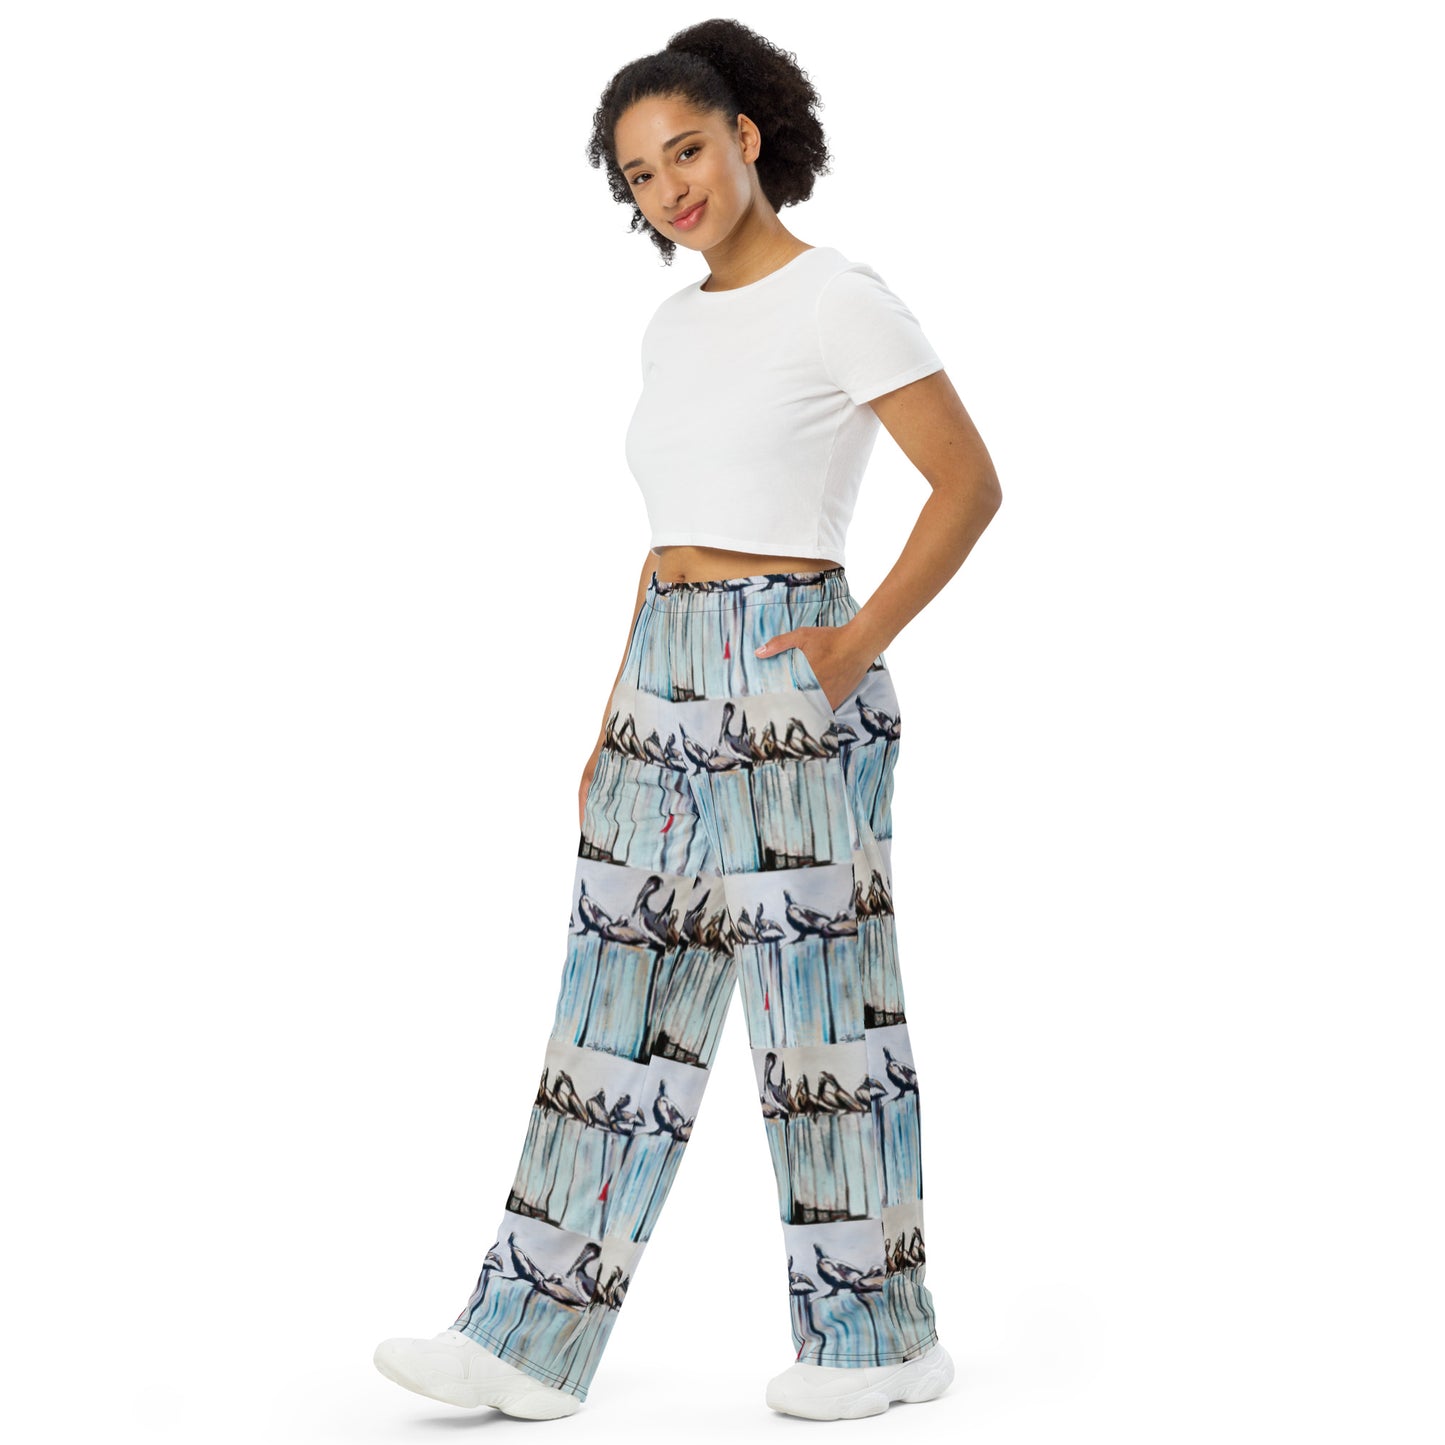 Pelicans on the Pier All-over print unisex wide-leg pants